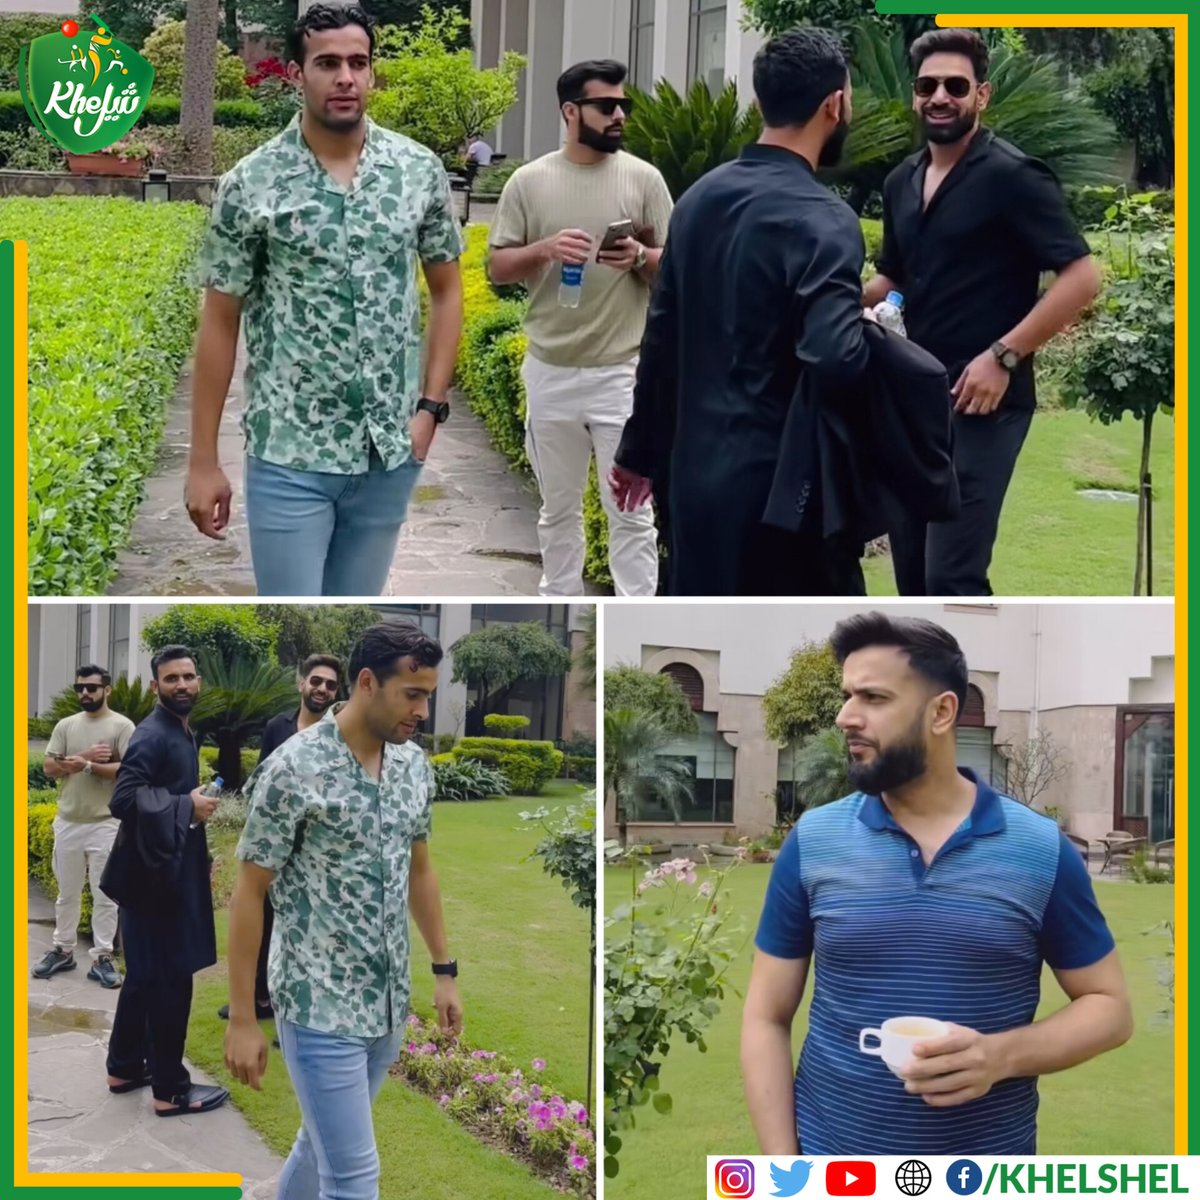 The boys in green are spending the rest days together in Lahore.

#Cricket | #Pakistan | #ShadabKhan | #ImadWasim | #AbbasAfridi | #FakharZaman | #HarisRauf | #Lahore